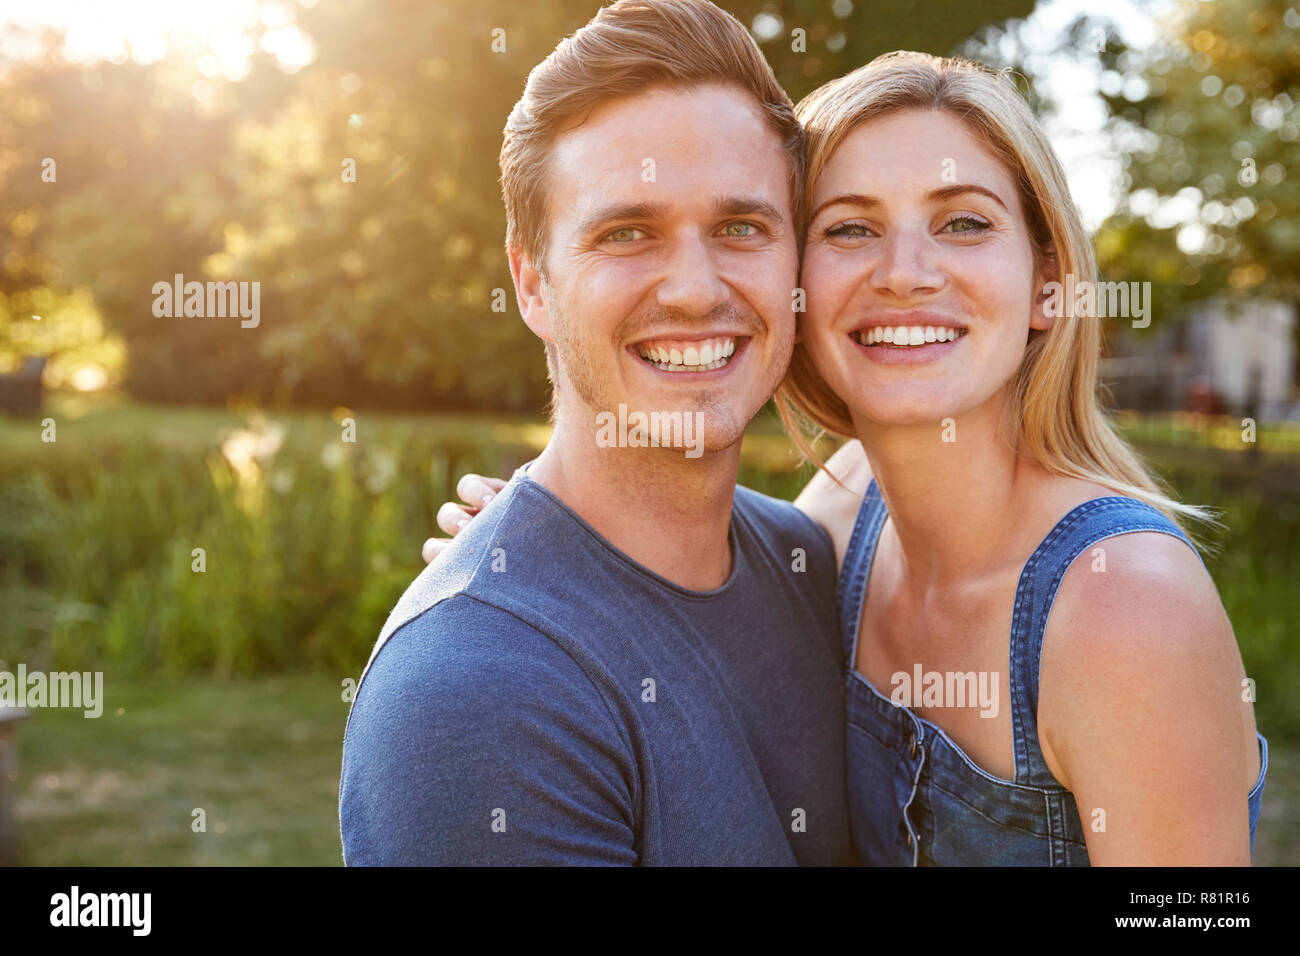 Portrait Of Smiling Couple Outdoors In Summer Park Against Flaring Sun Stock Photo